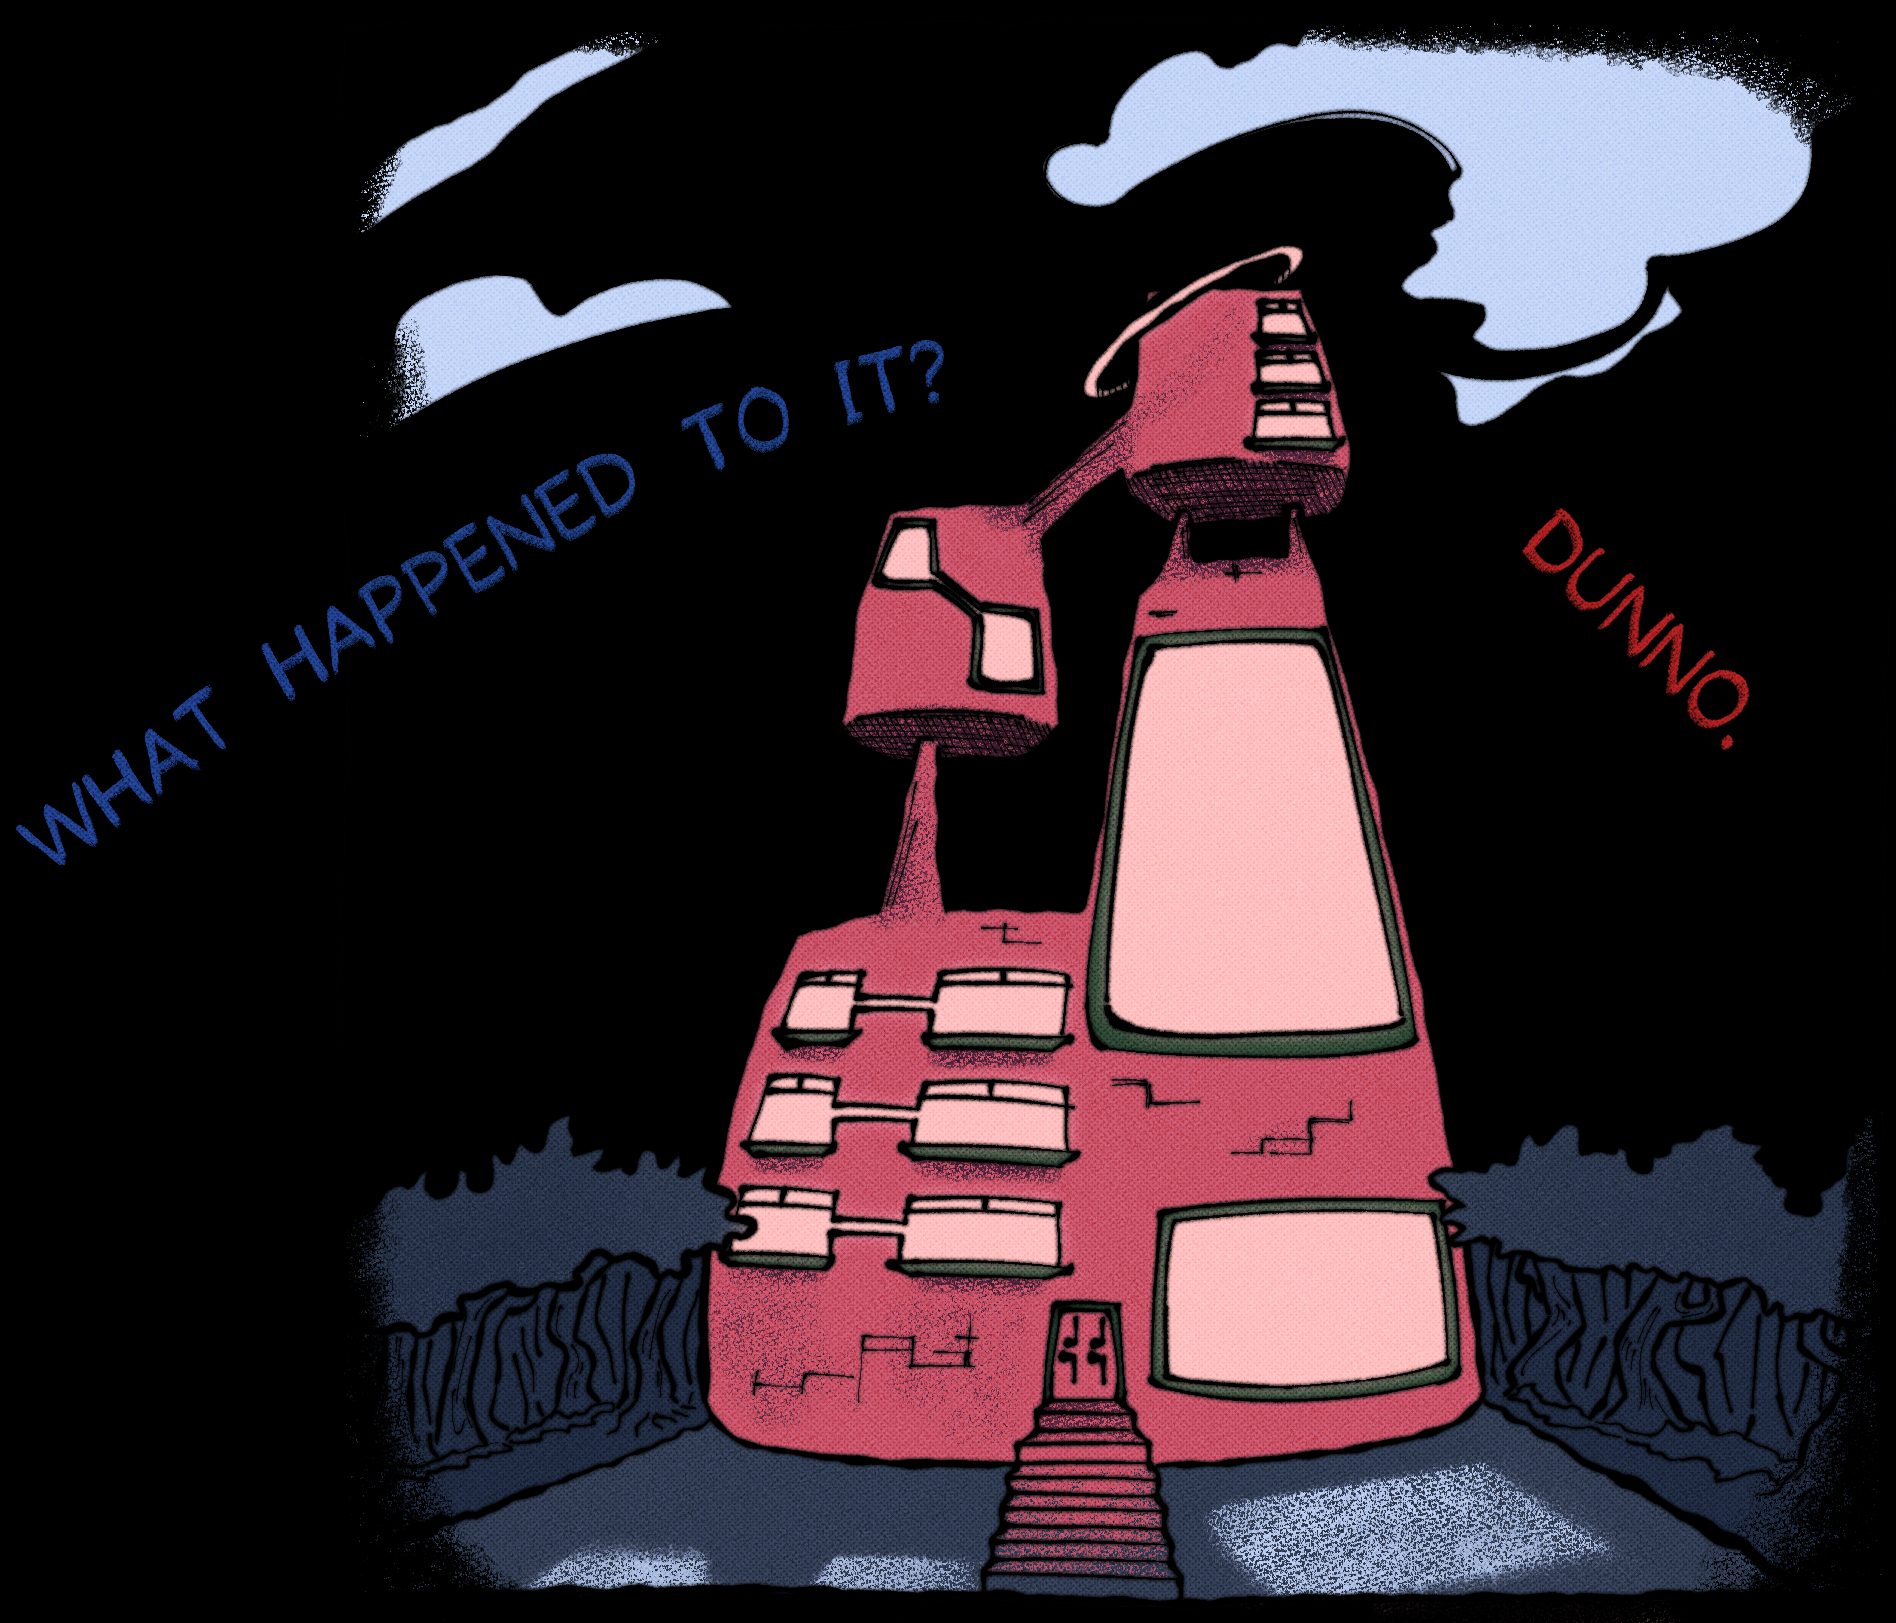 Illustration of a tall, pink and futuristic building in front of a night sky with the dialogue 'What Happened to it?', followed by 'Dunno', framing it on the left and right. The text is coloured in blue and red respectively.